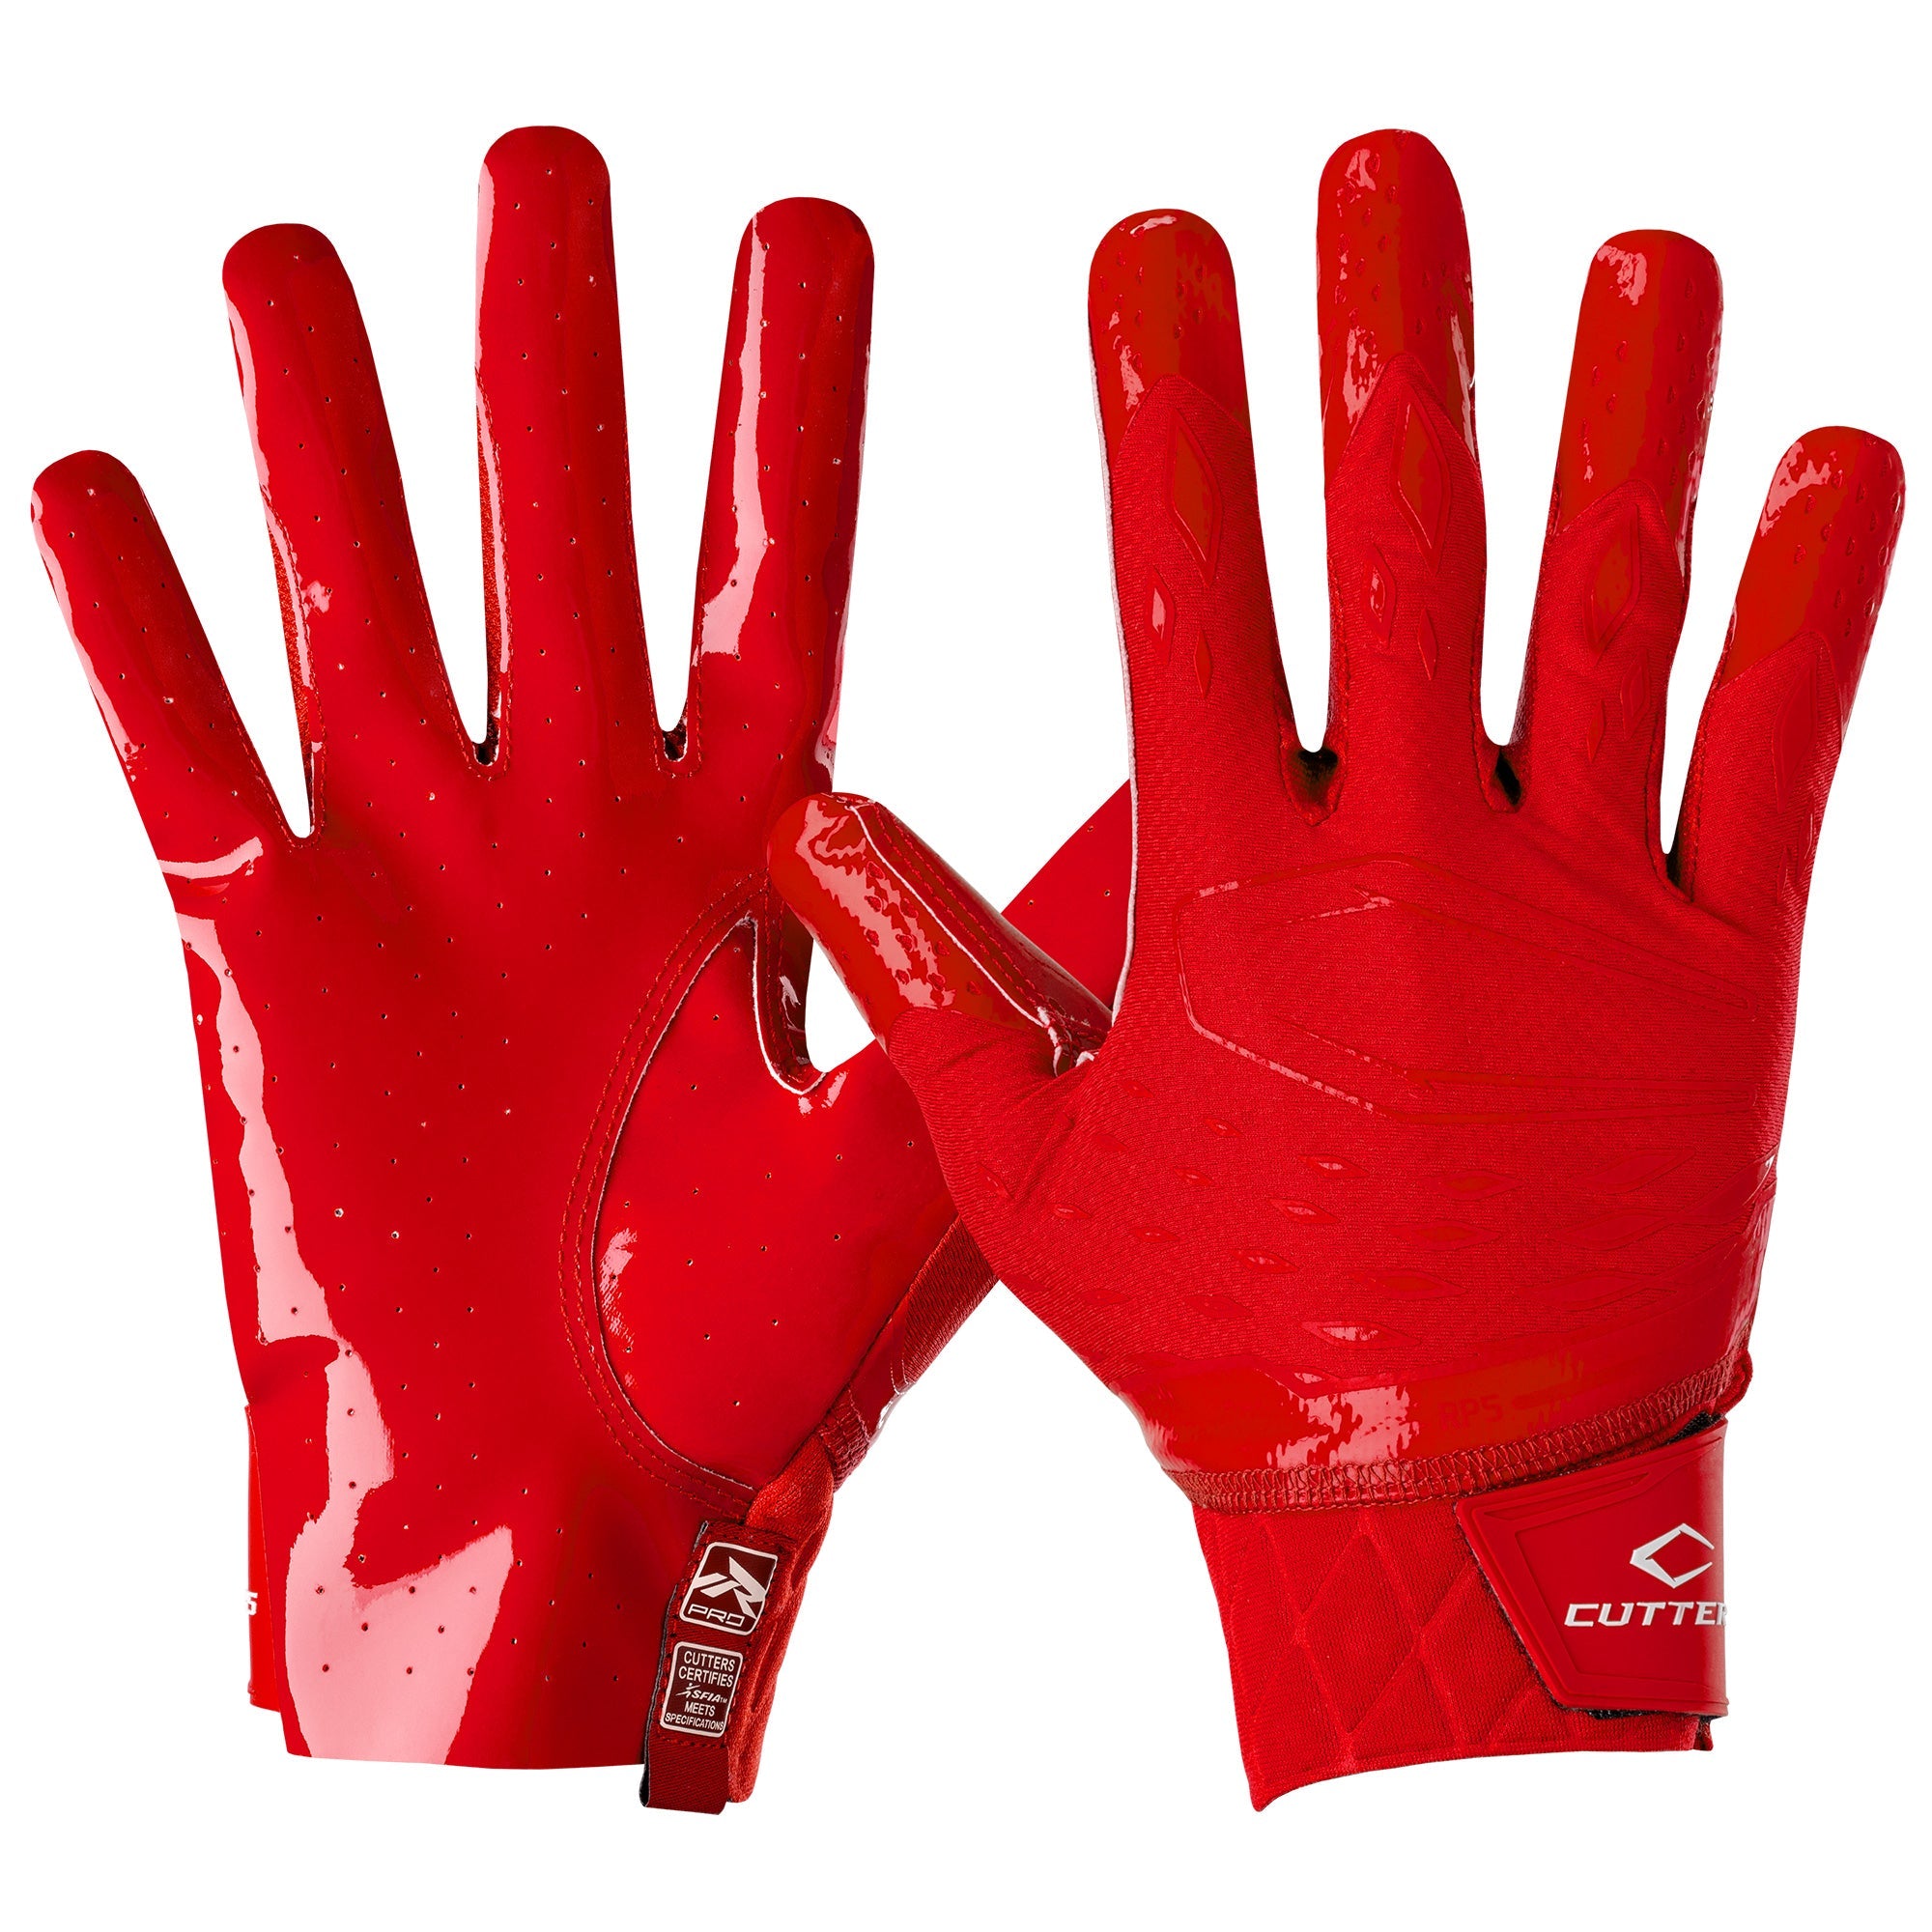 NFL worried about sticky gloves  but why?